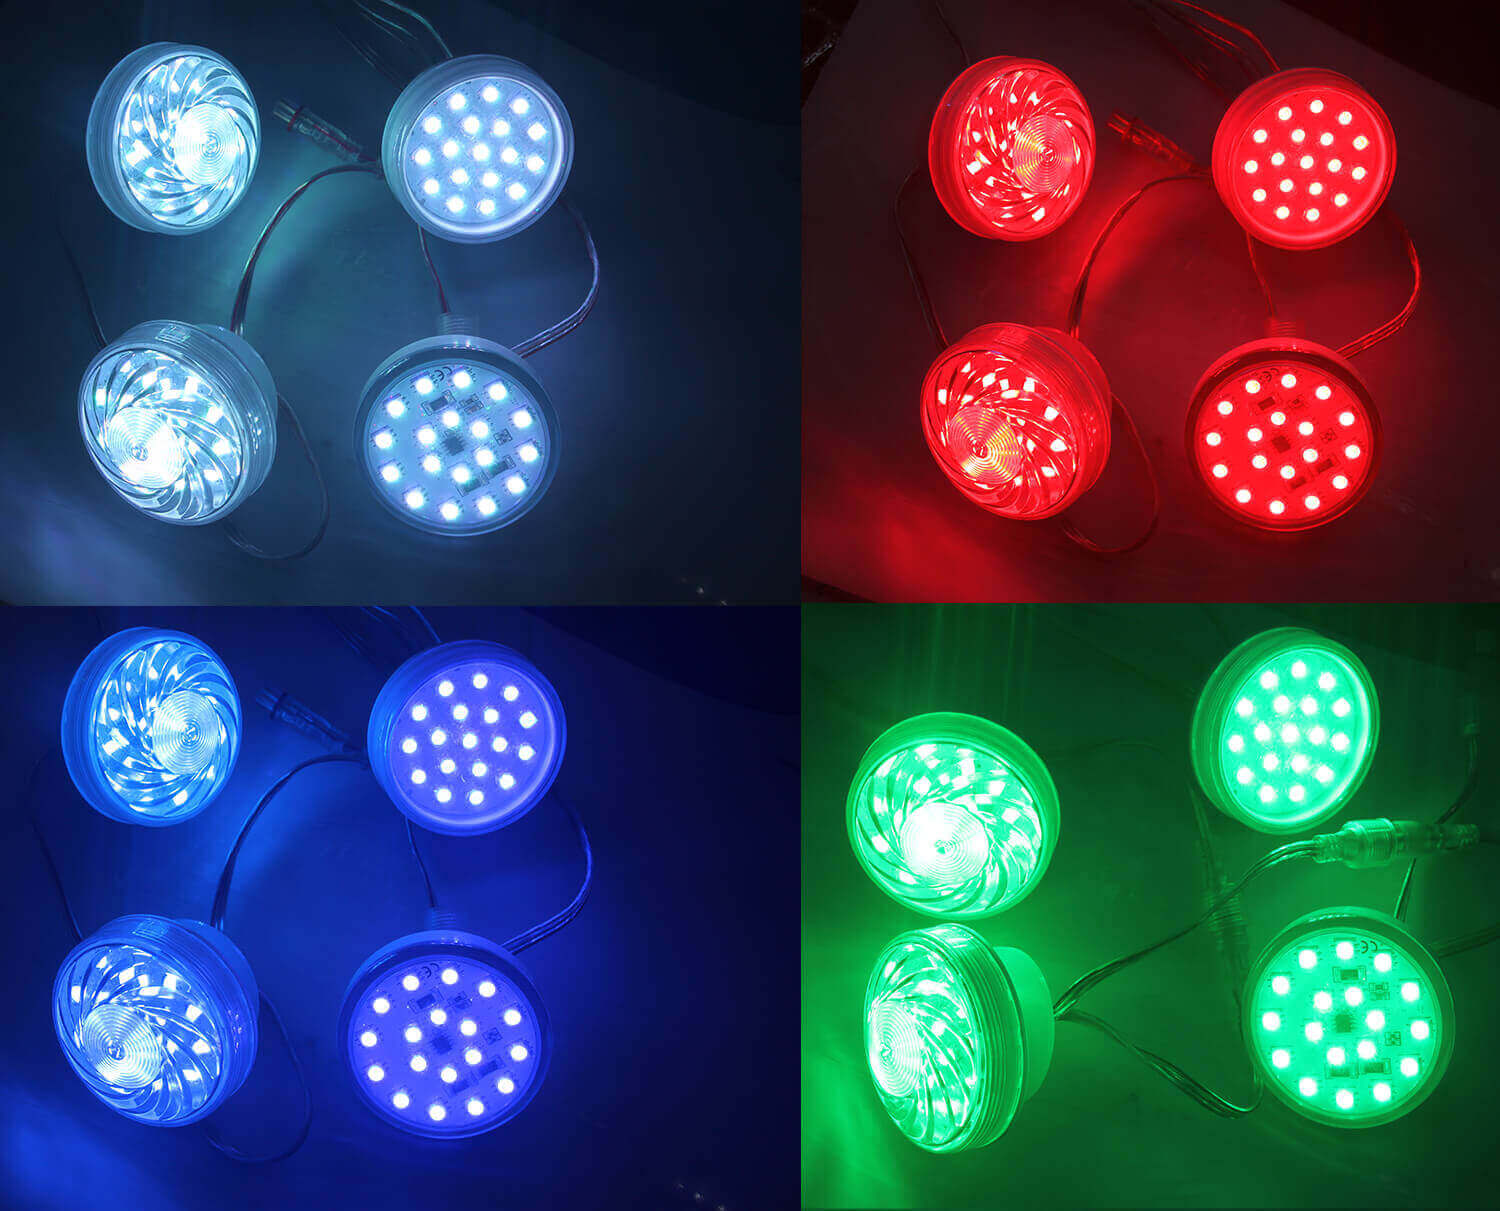  LED lamp suppliers